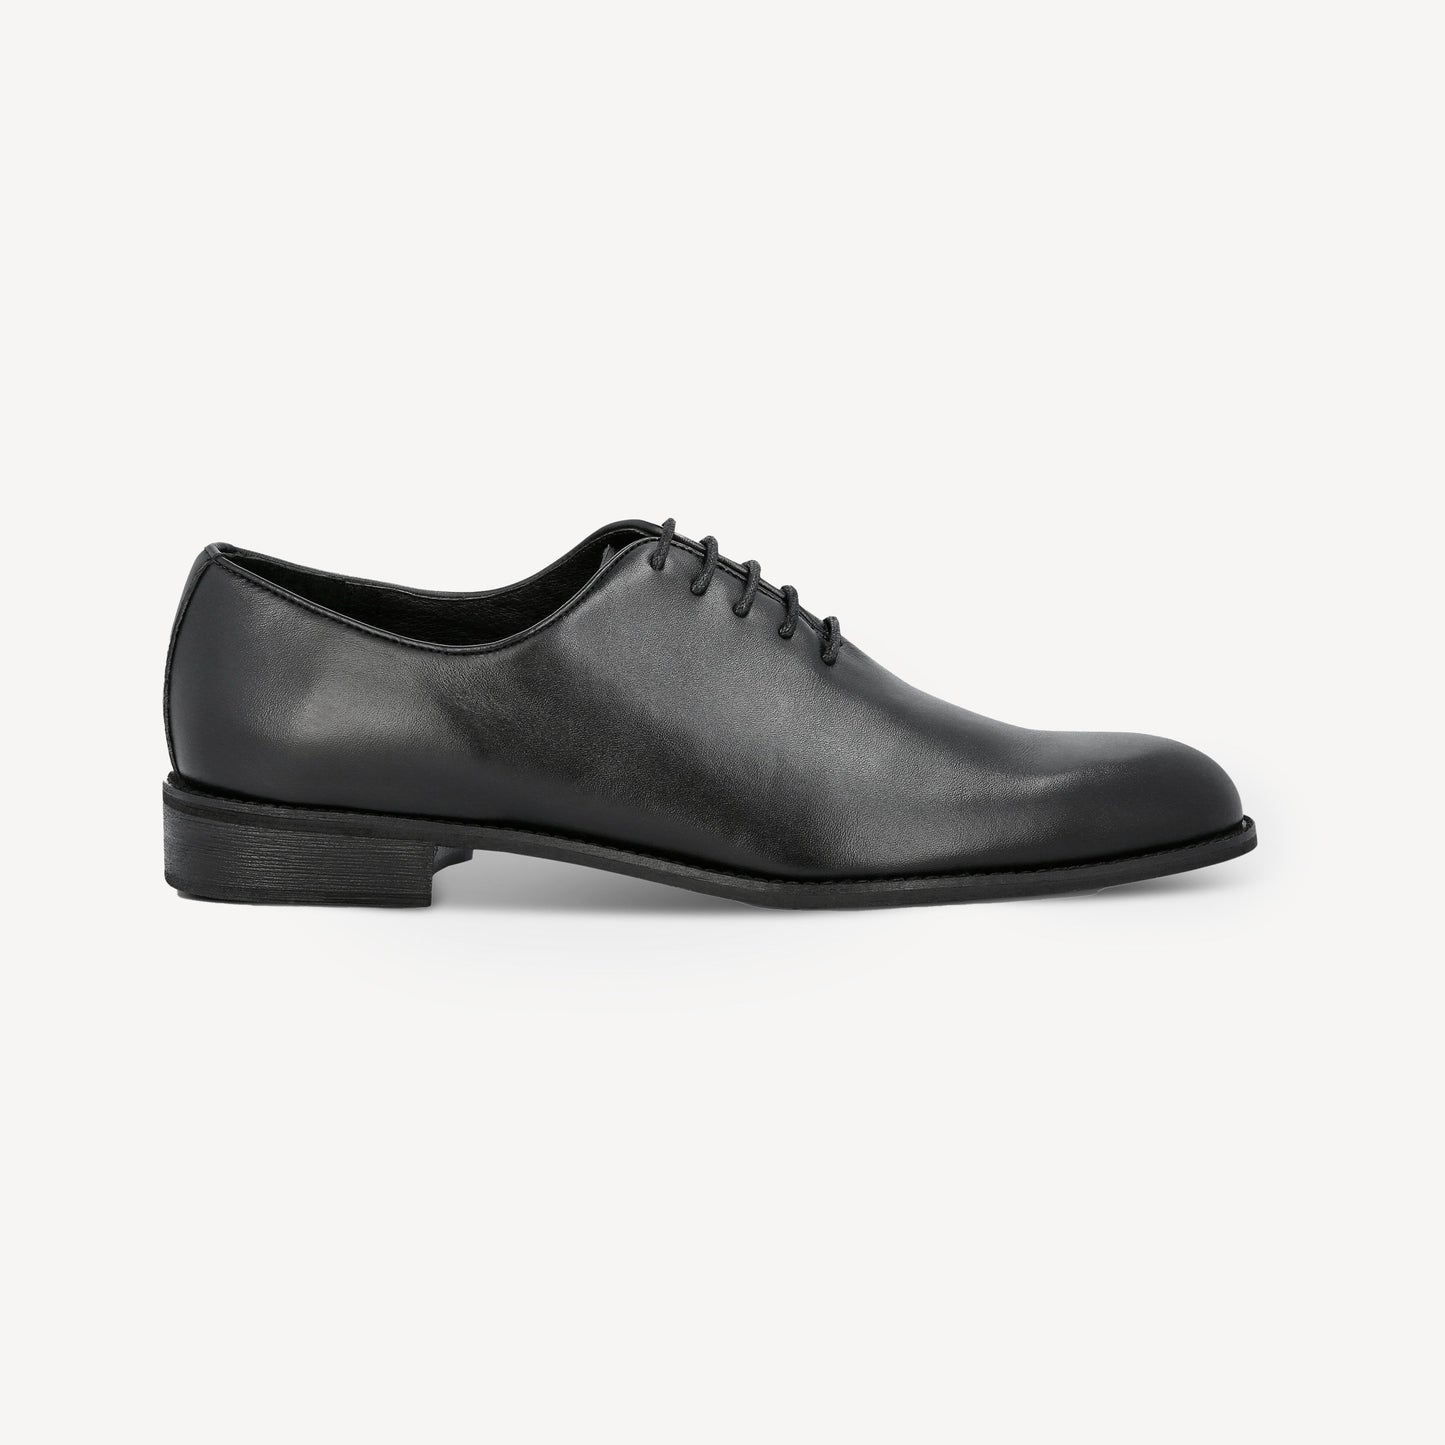 Black Oxford Shoes - MITCHELL by SuitShop